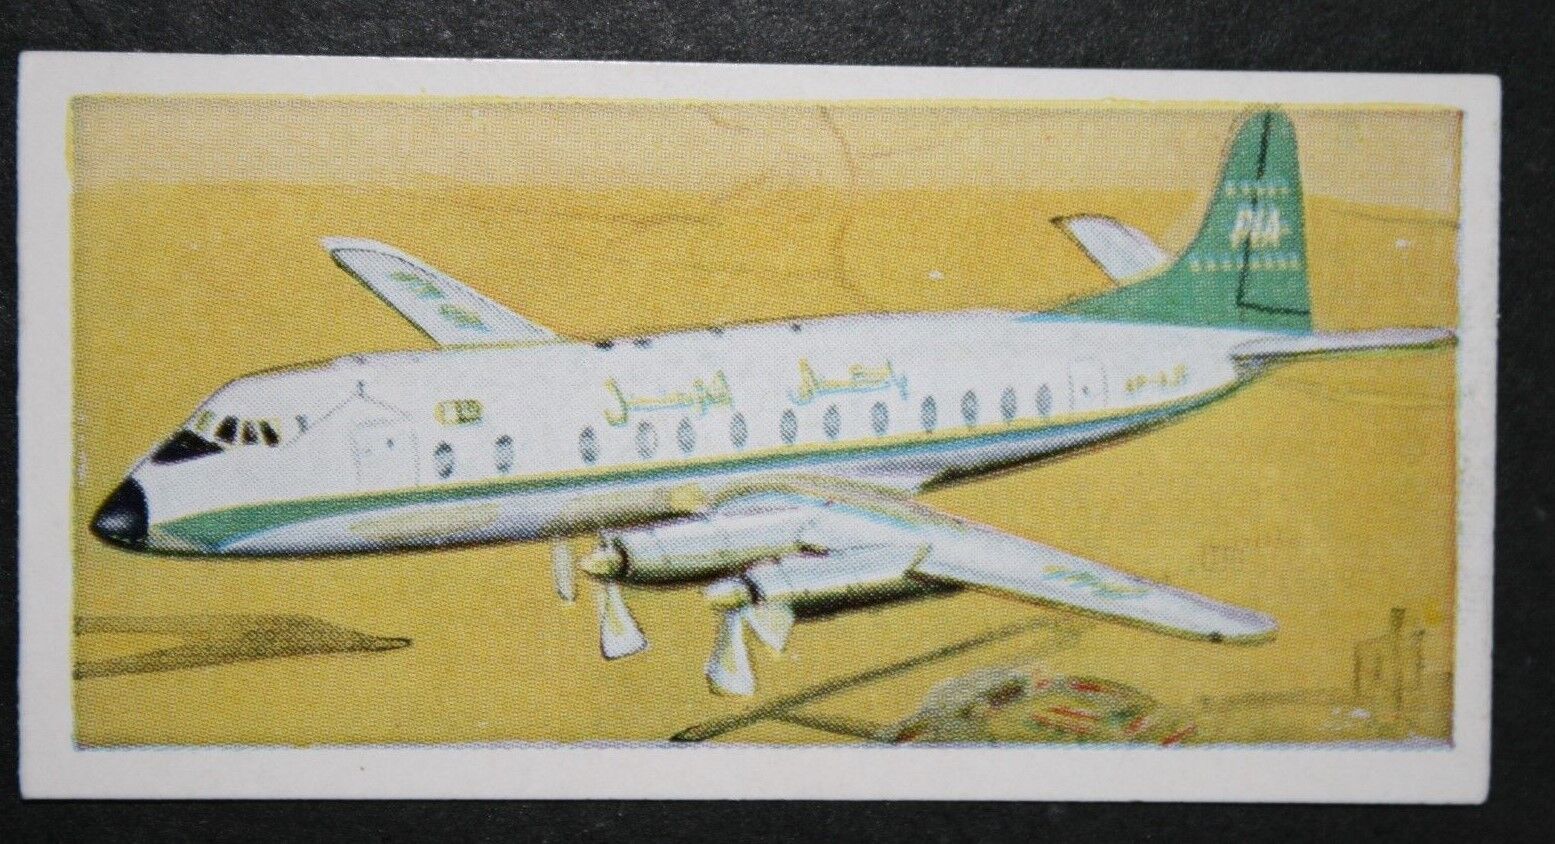 Vickers Armstrong VISCOUNT  Pakistan International Airlines   Vintage Card  VGC